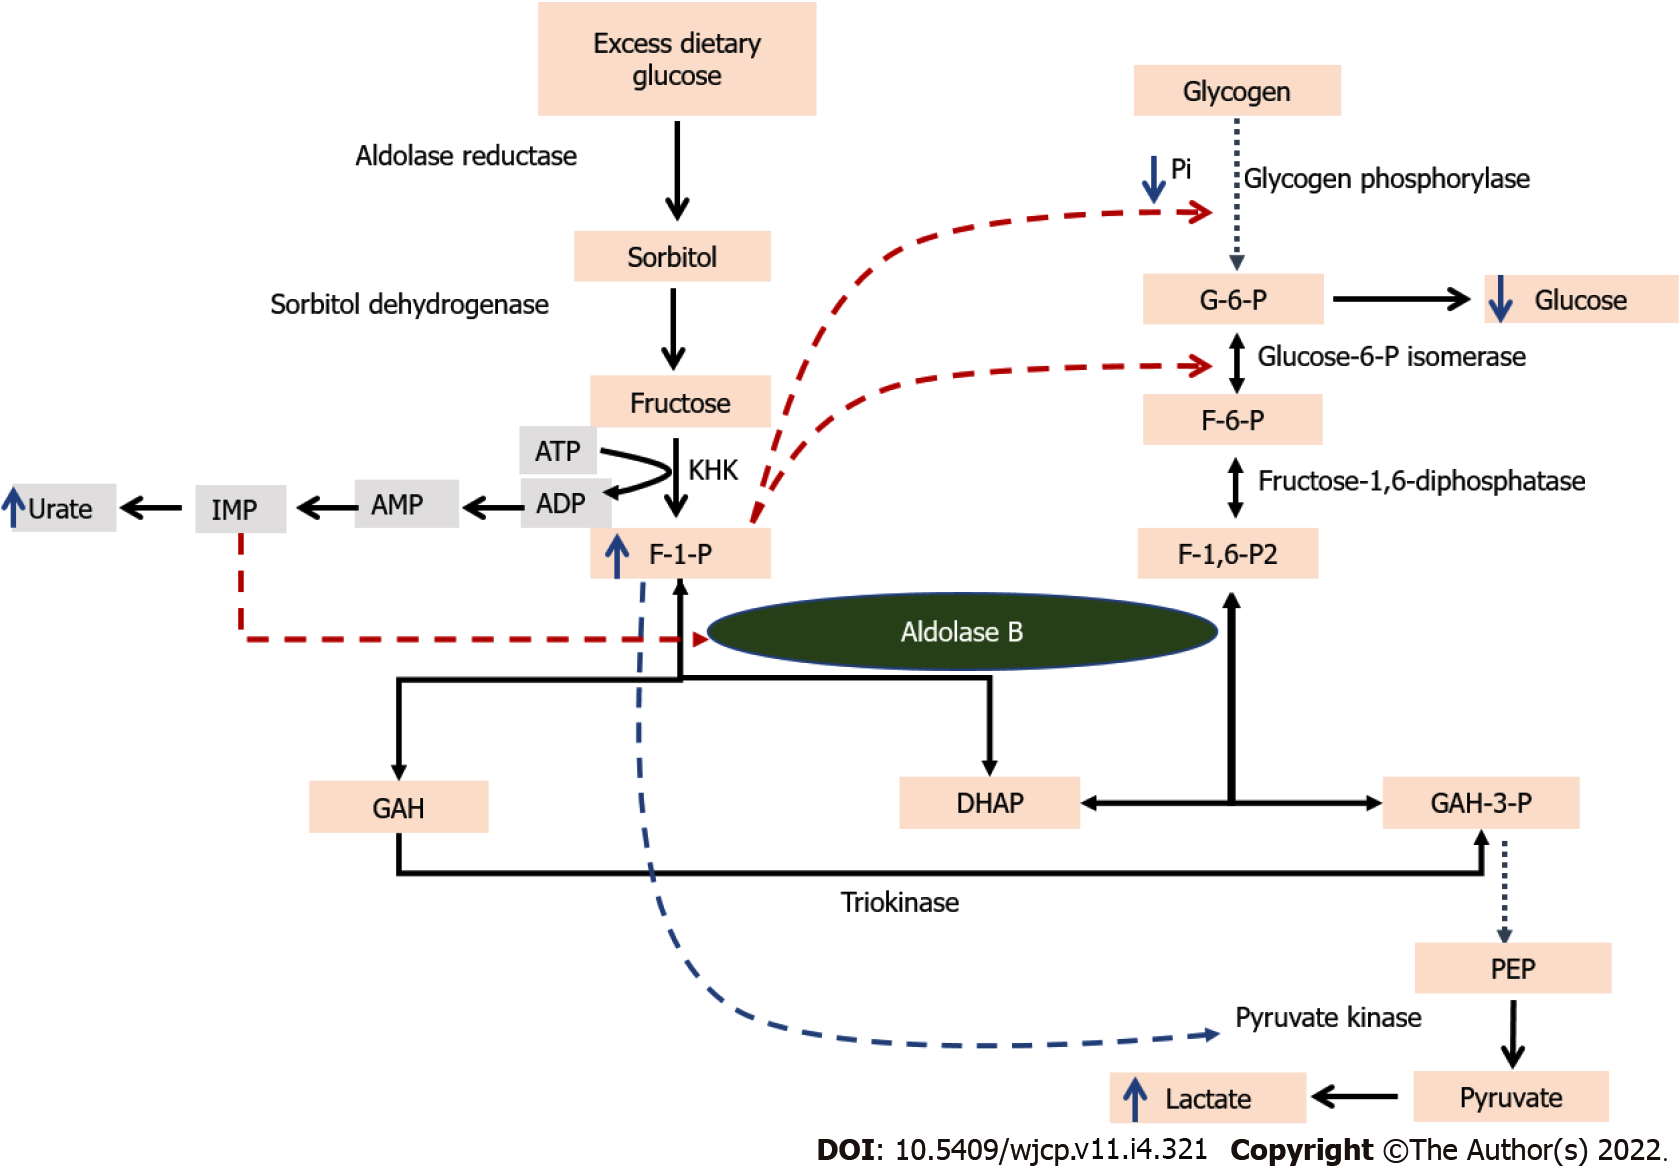 Hereditary fructose intolerance: A comprehensive review